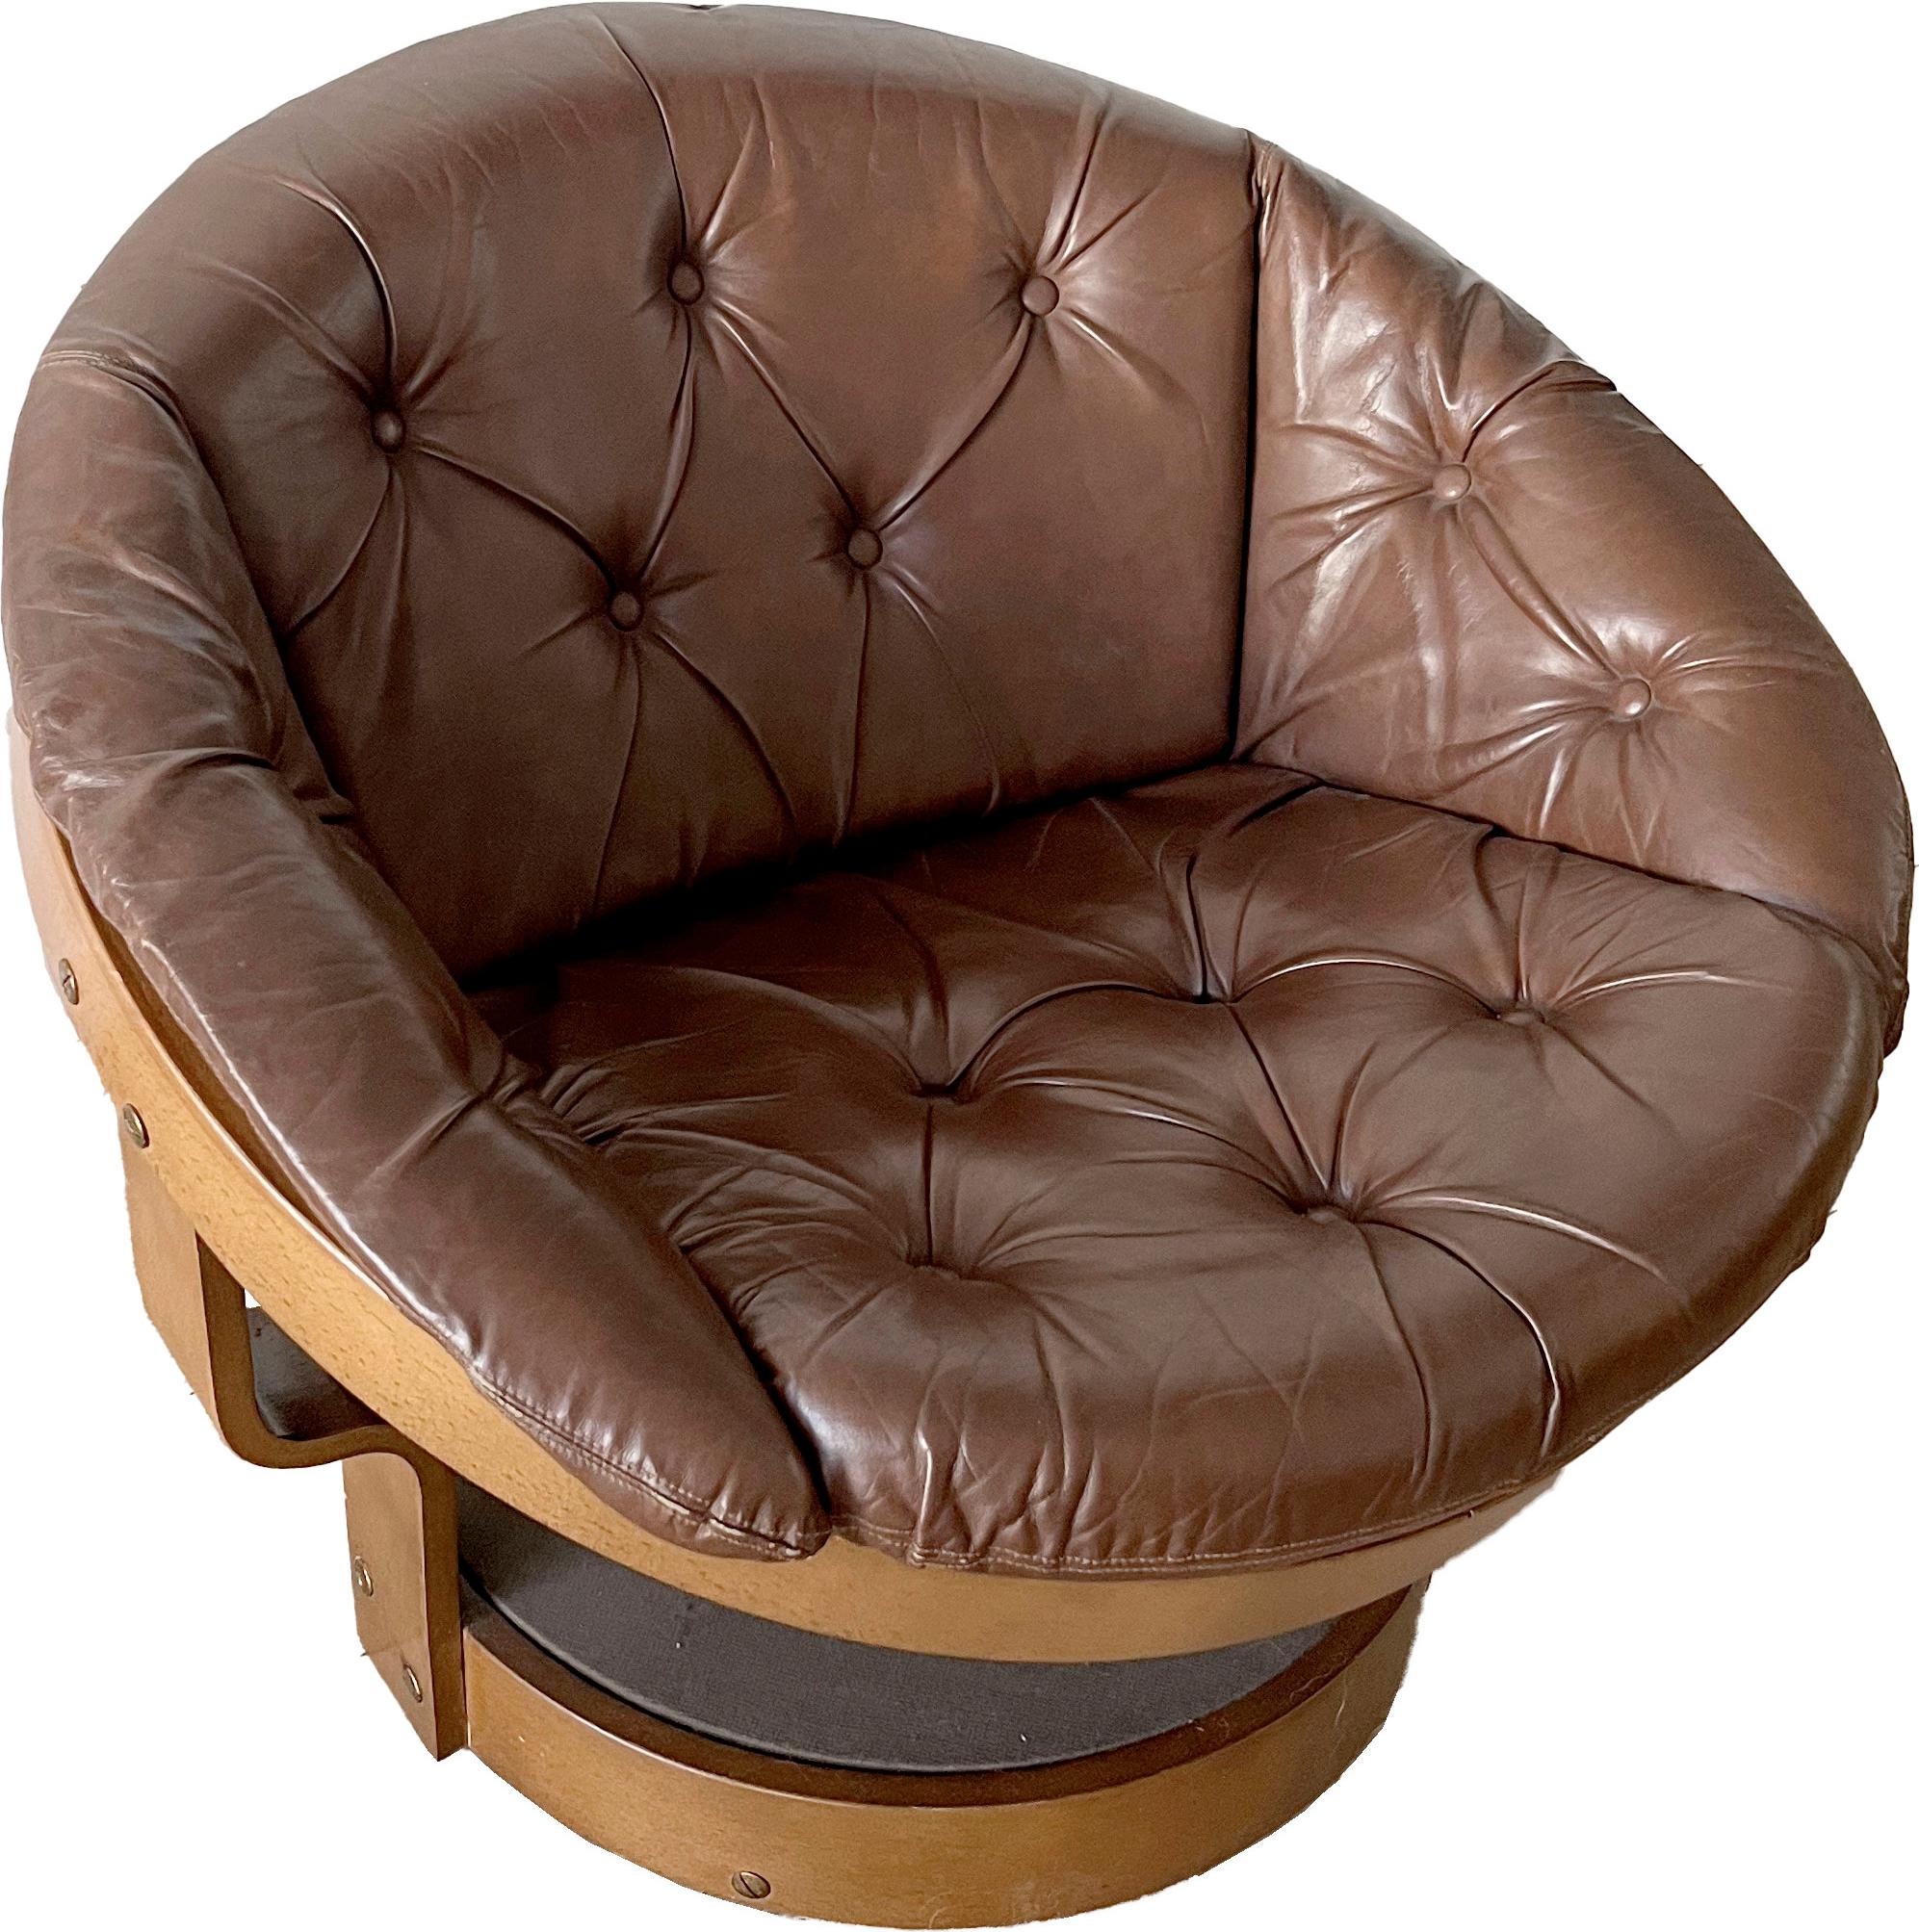 The Convair swivel armchair was designed in the 1970s by Norwegian designer Oddmund Vad. The design of this armchair stands out for its spherical shape, which gives it a futuristic and modern look.

The Convair armchair features a swivel base and